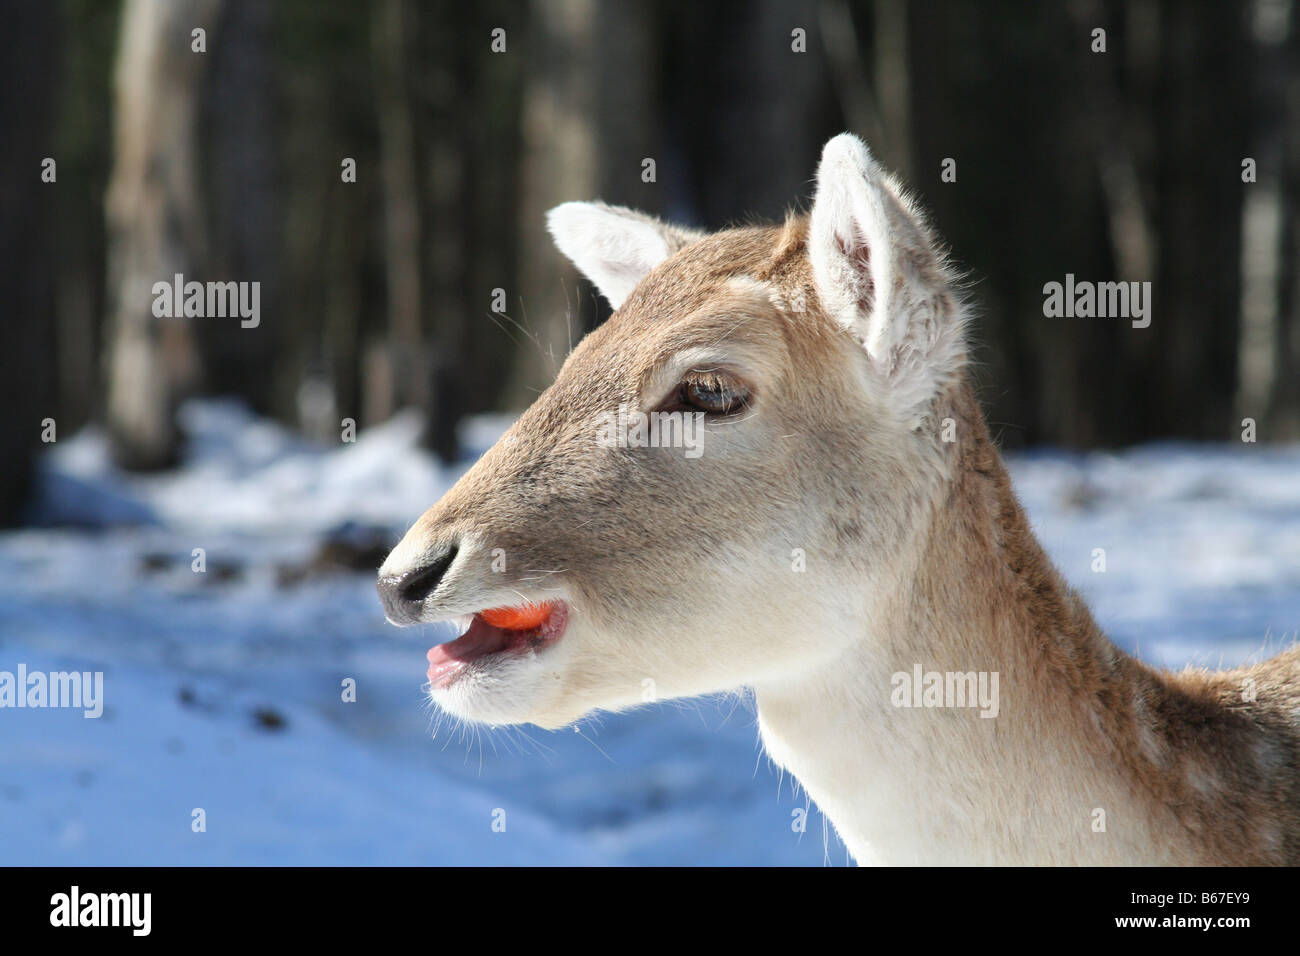 Baby deer from profile Stock Photo